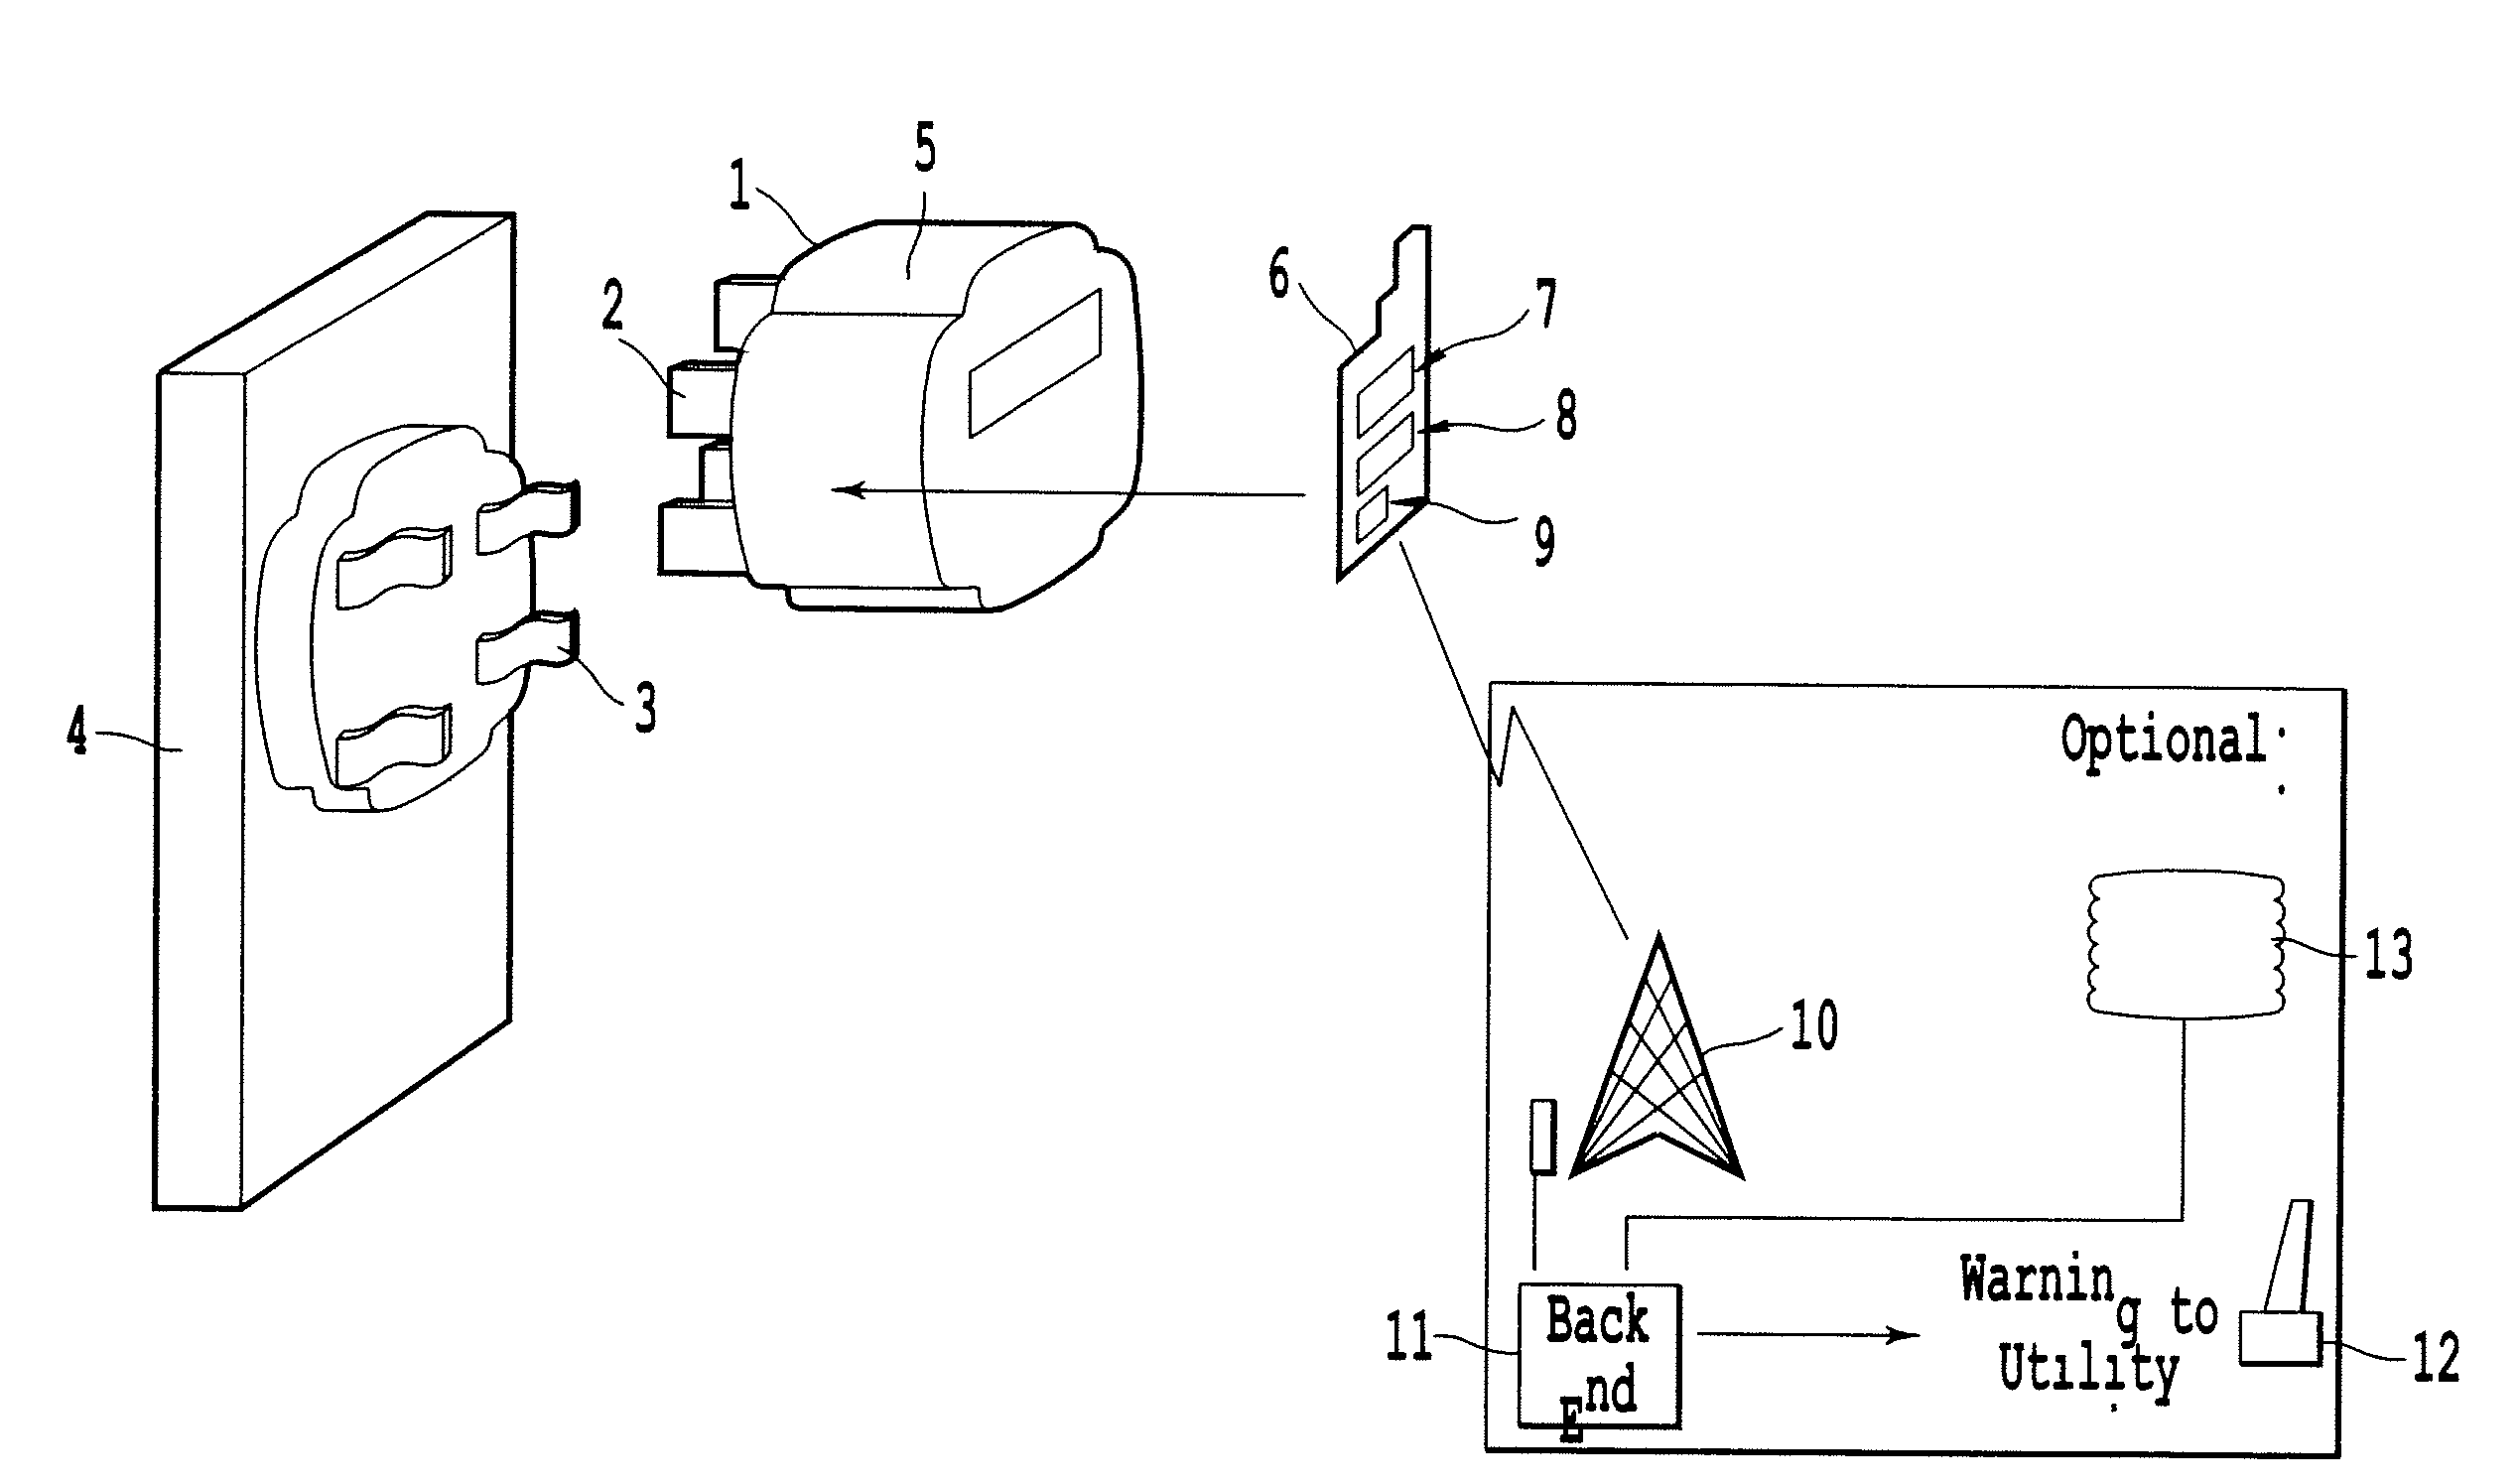 Method, apparatus, and system for detecting hot socket deterioration in an electrical meter connection